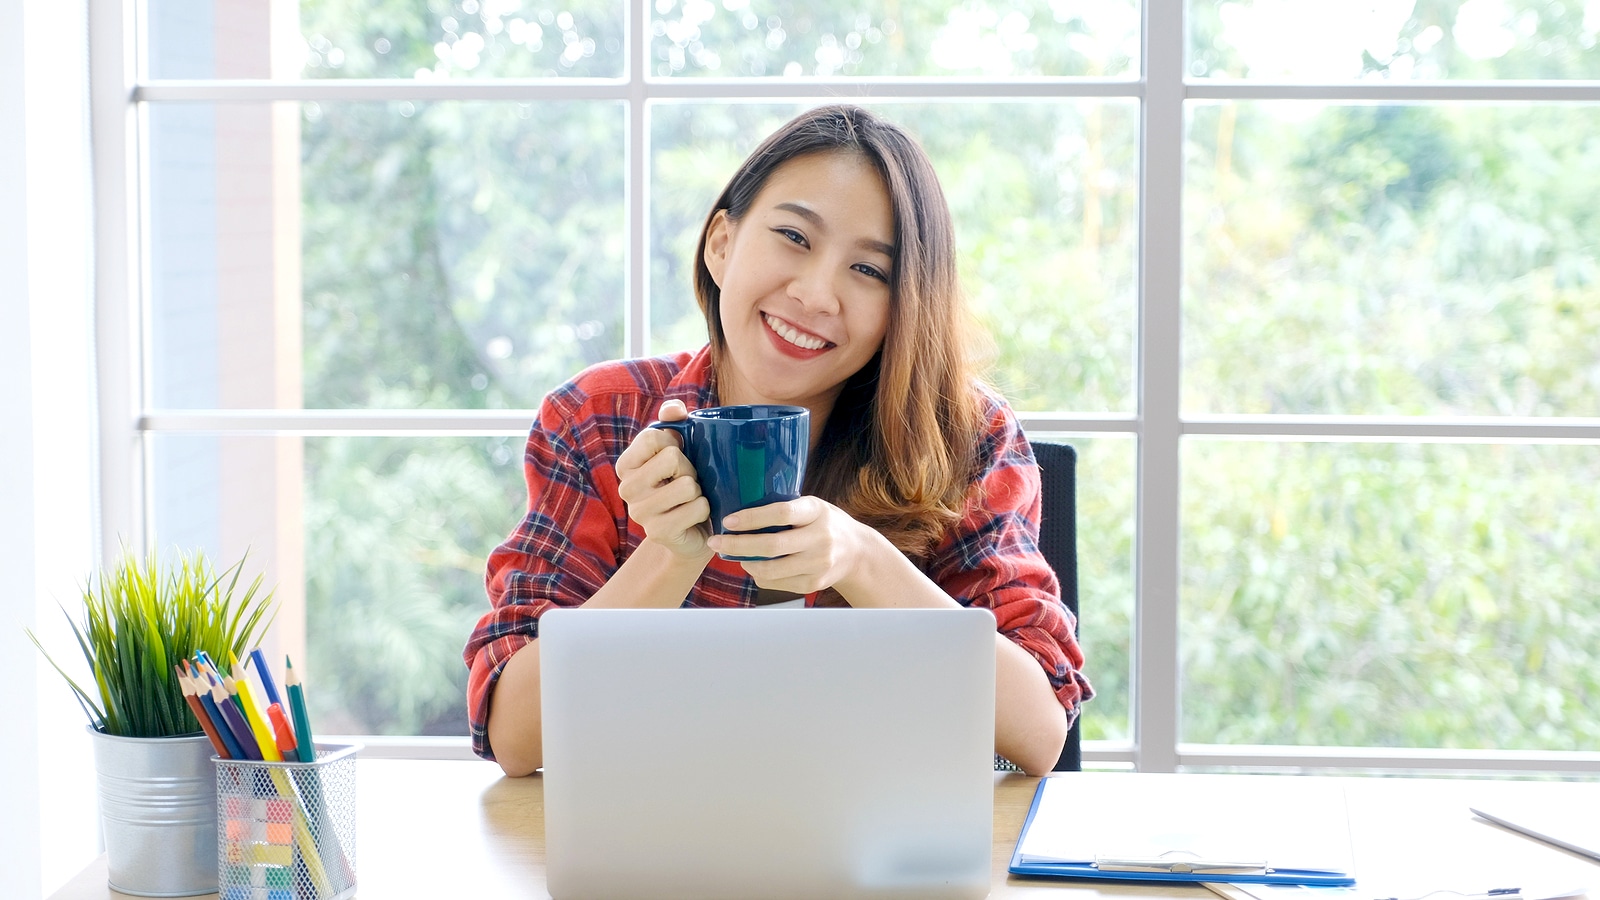 Happy woman working from home on her laptop drinking coffee. She works with an SEO specialist from Simplified SEO Consulting to rank better on Google